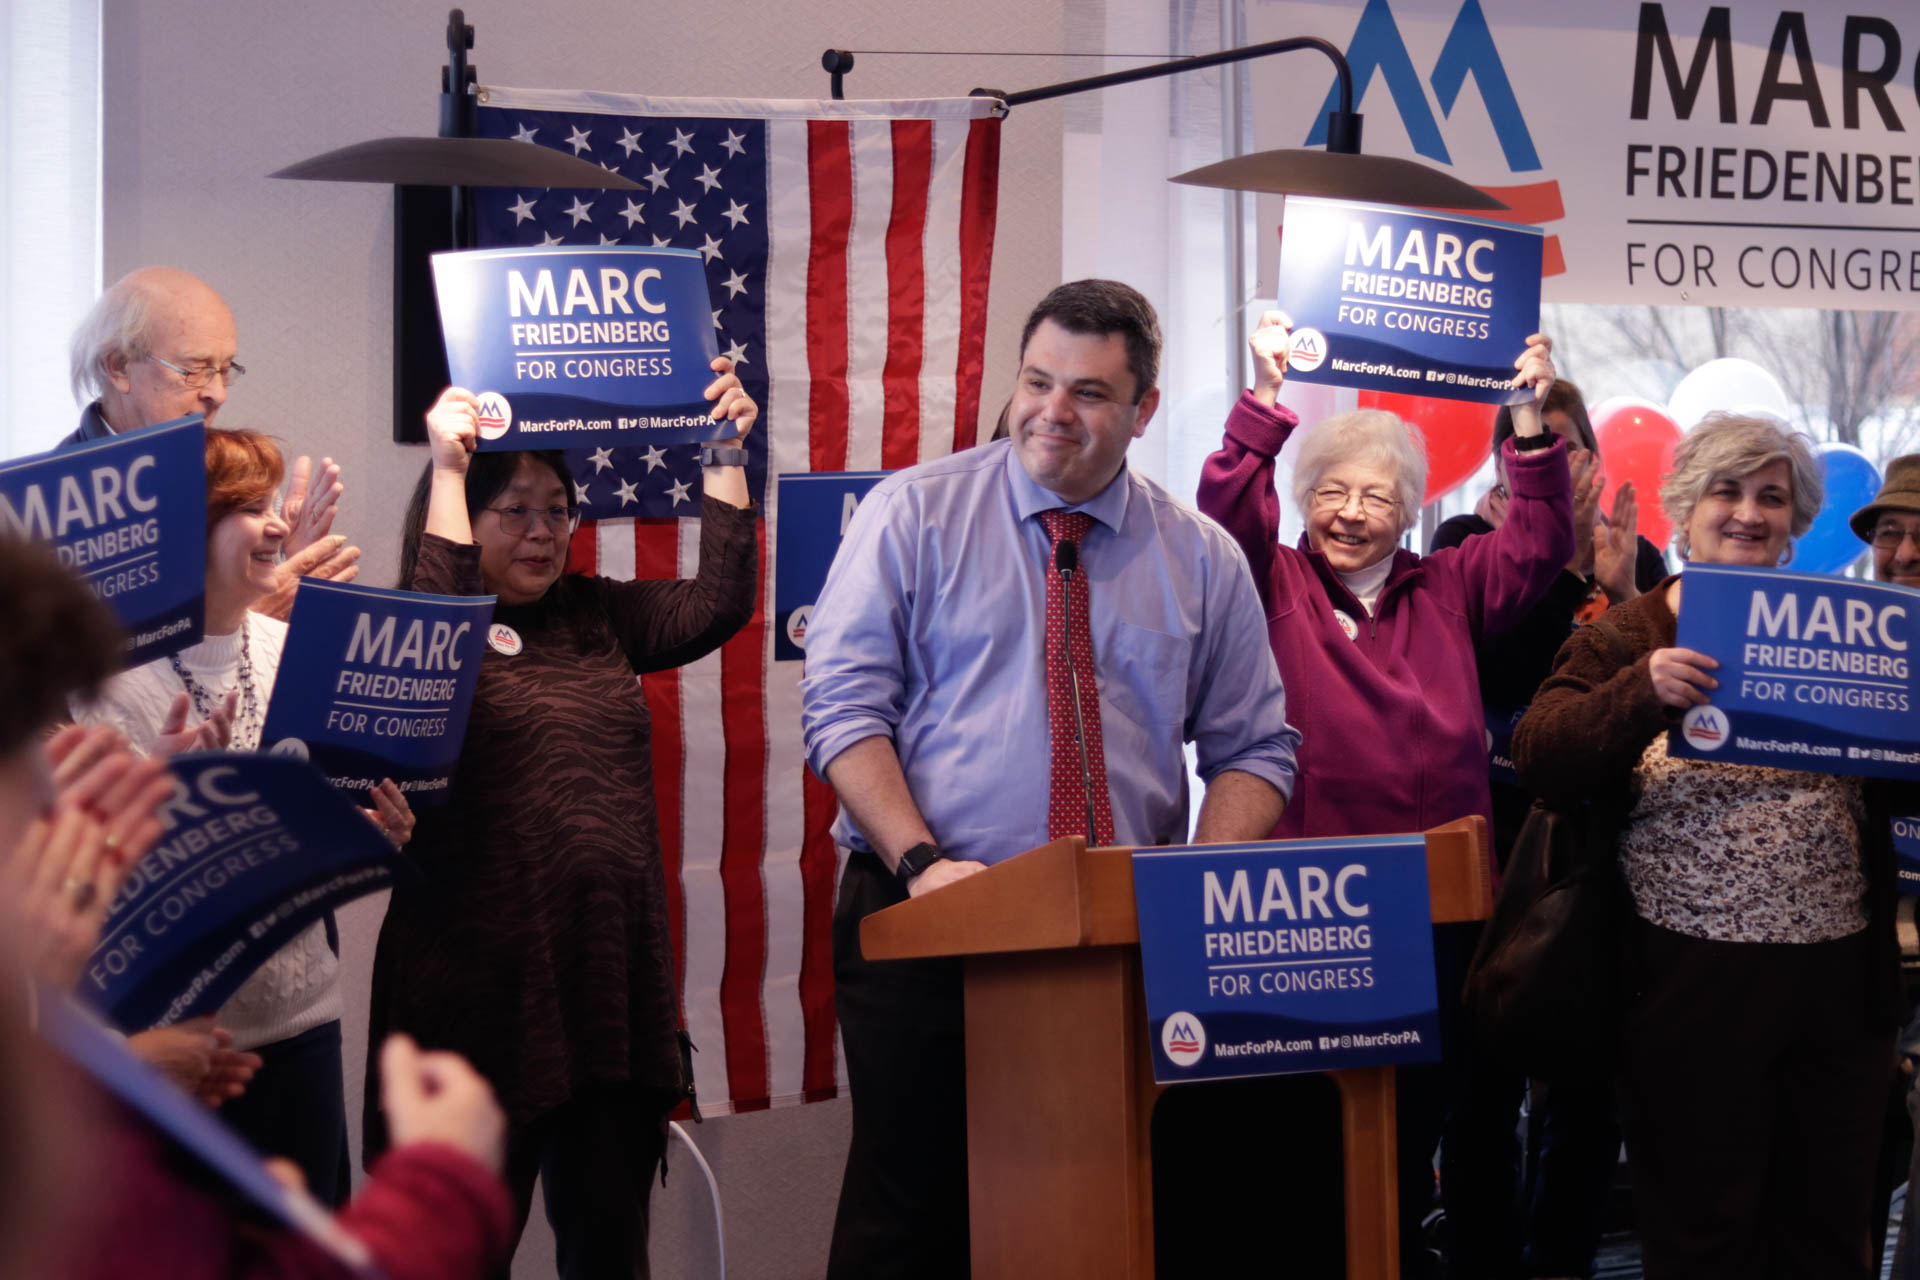 A white man in a tie speaking at a podium, surrounded by people holding signs that say Marc